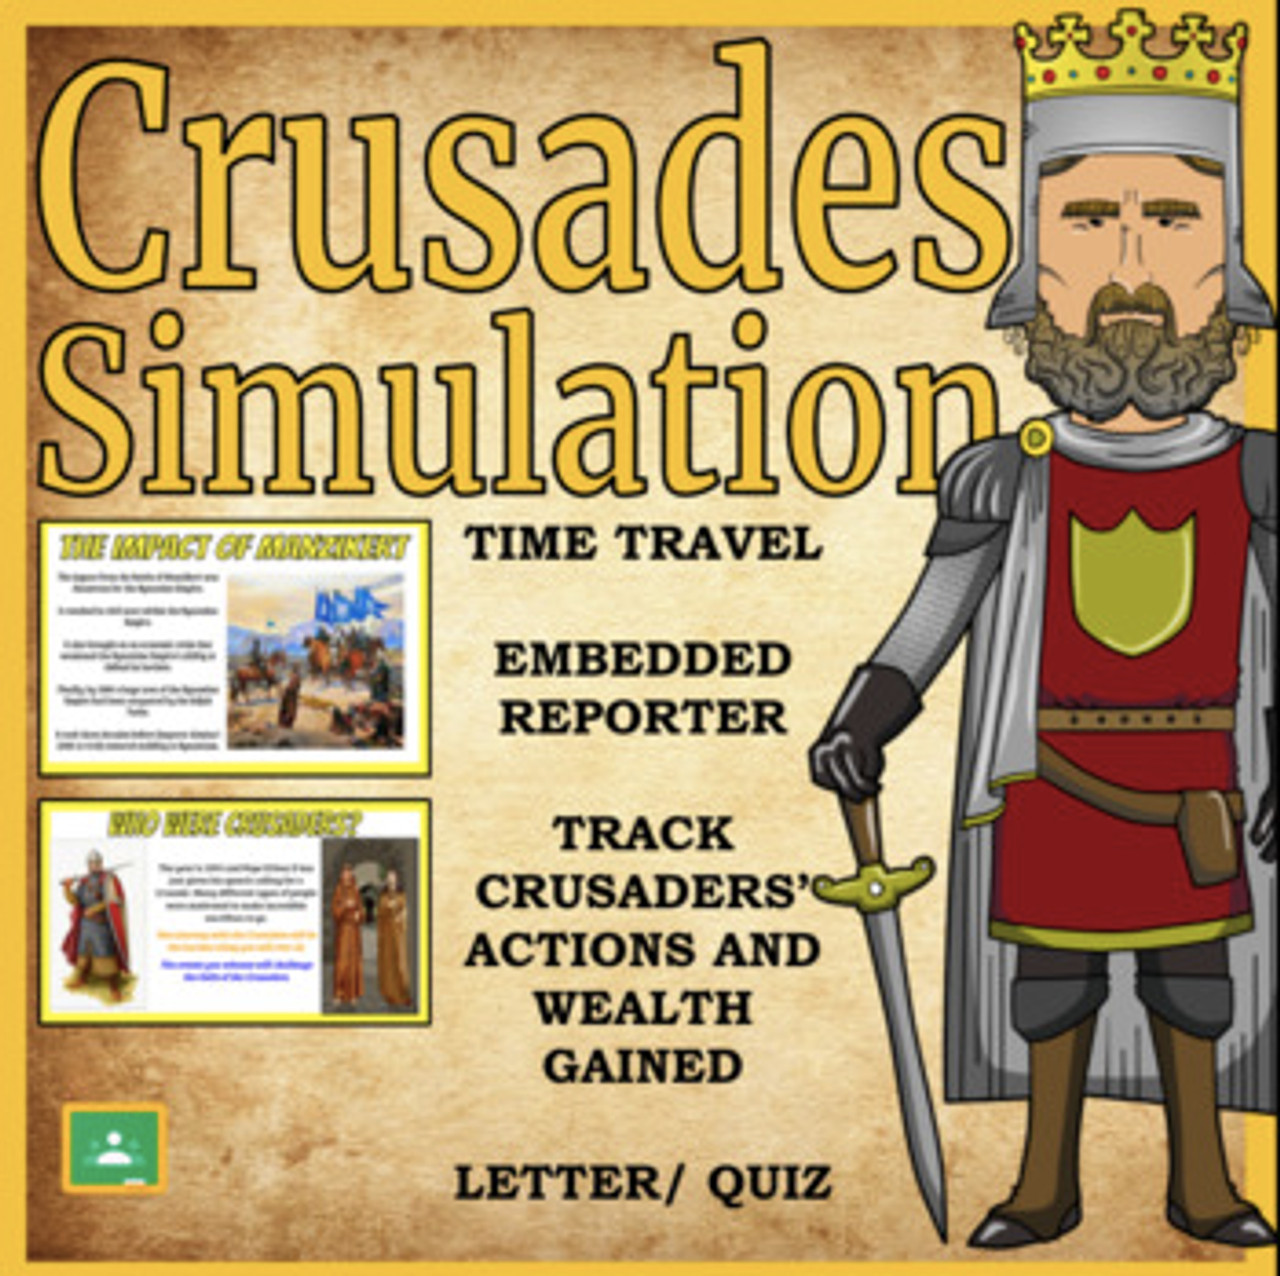 Crusaders Heaven Codes - Free Cash and Items